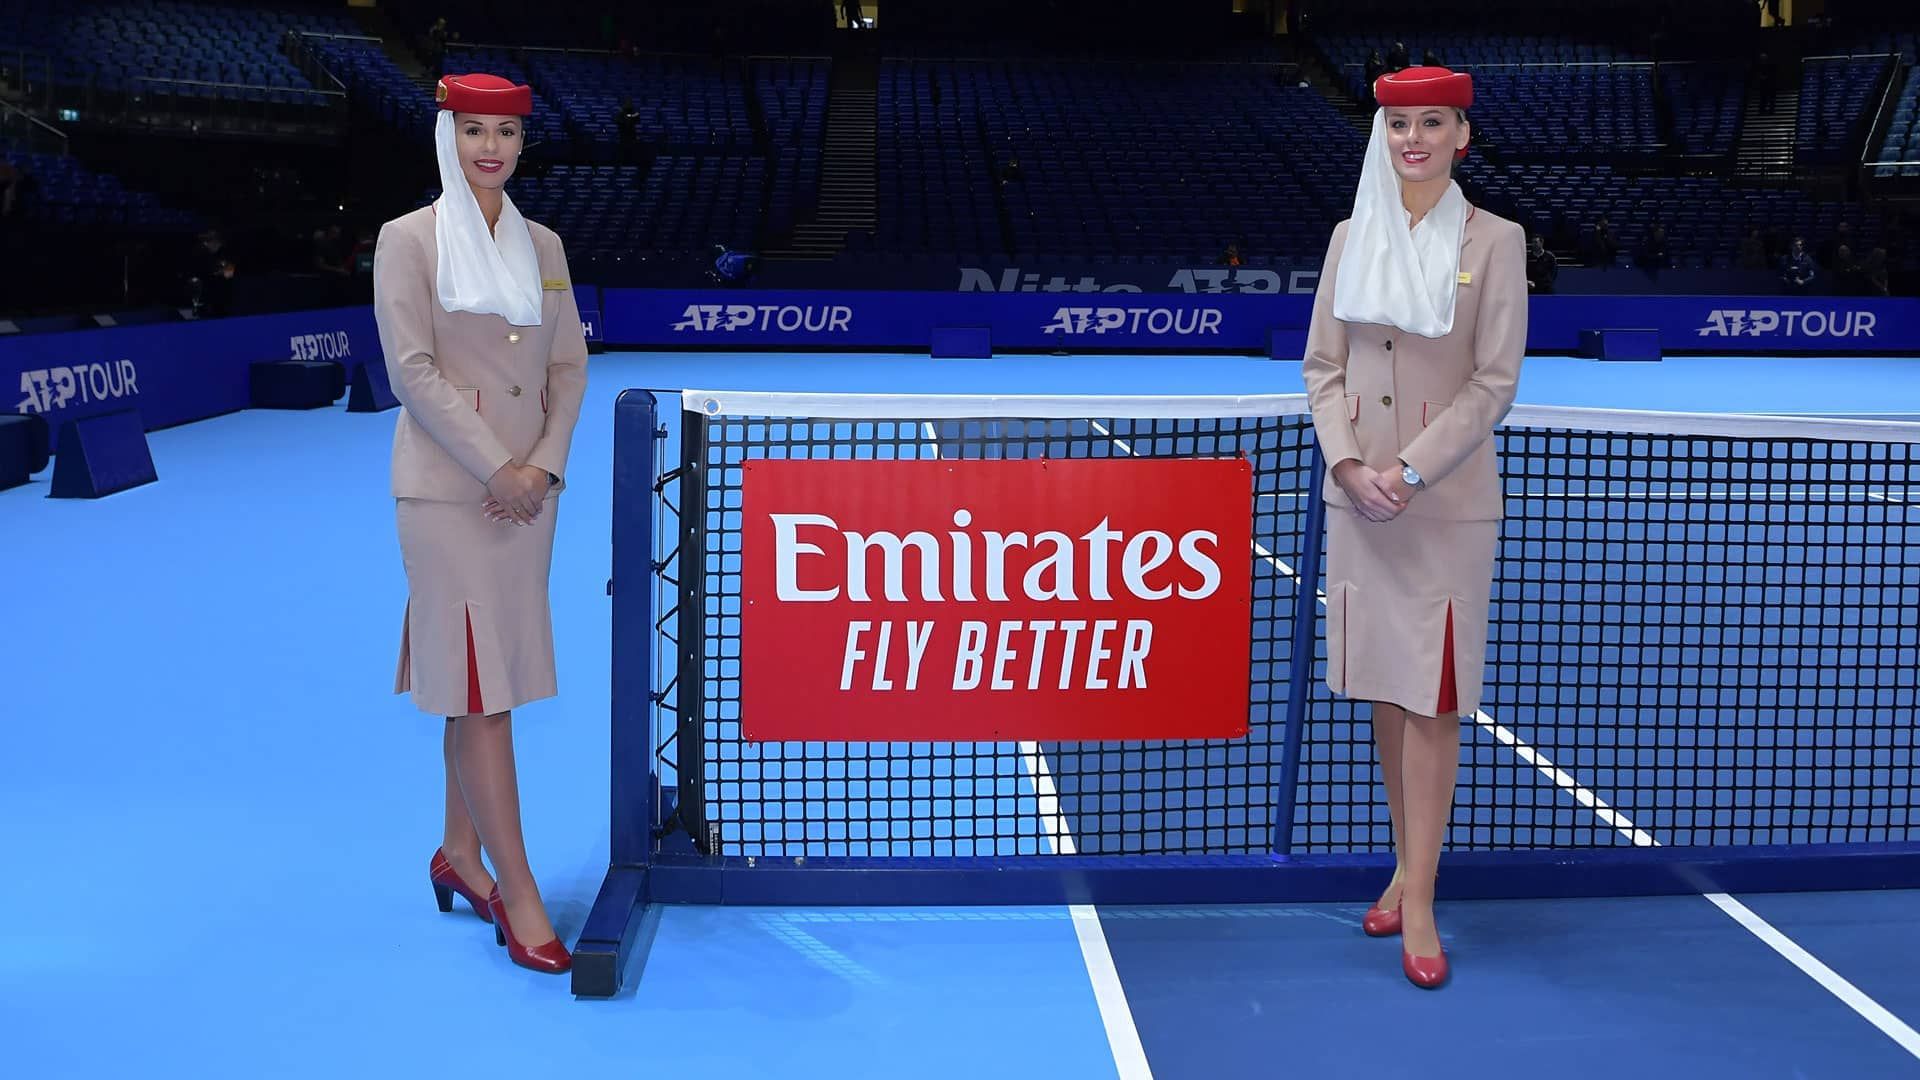 Emirates branding at the ATP Tour Finals in 2019.